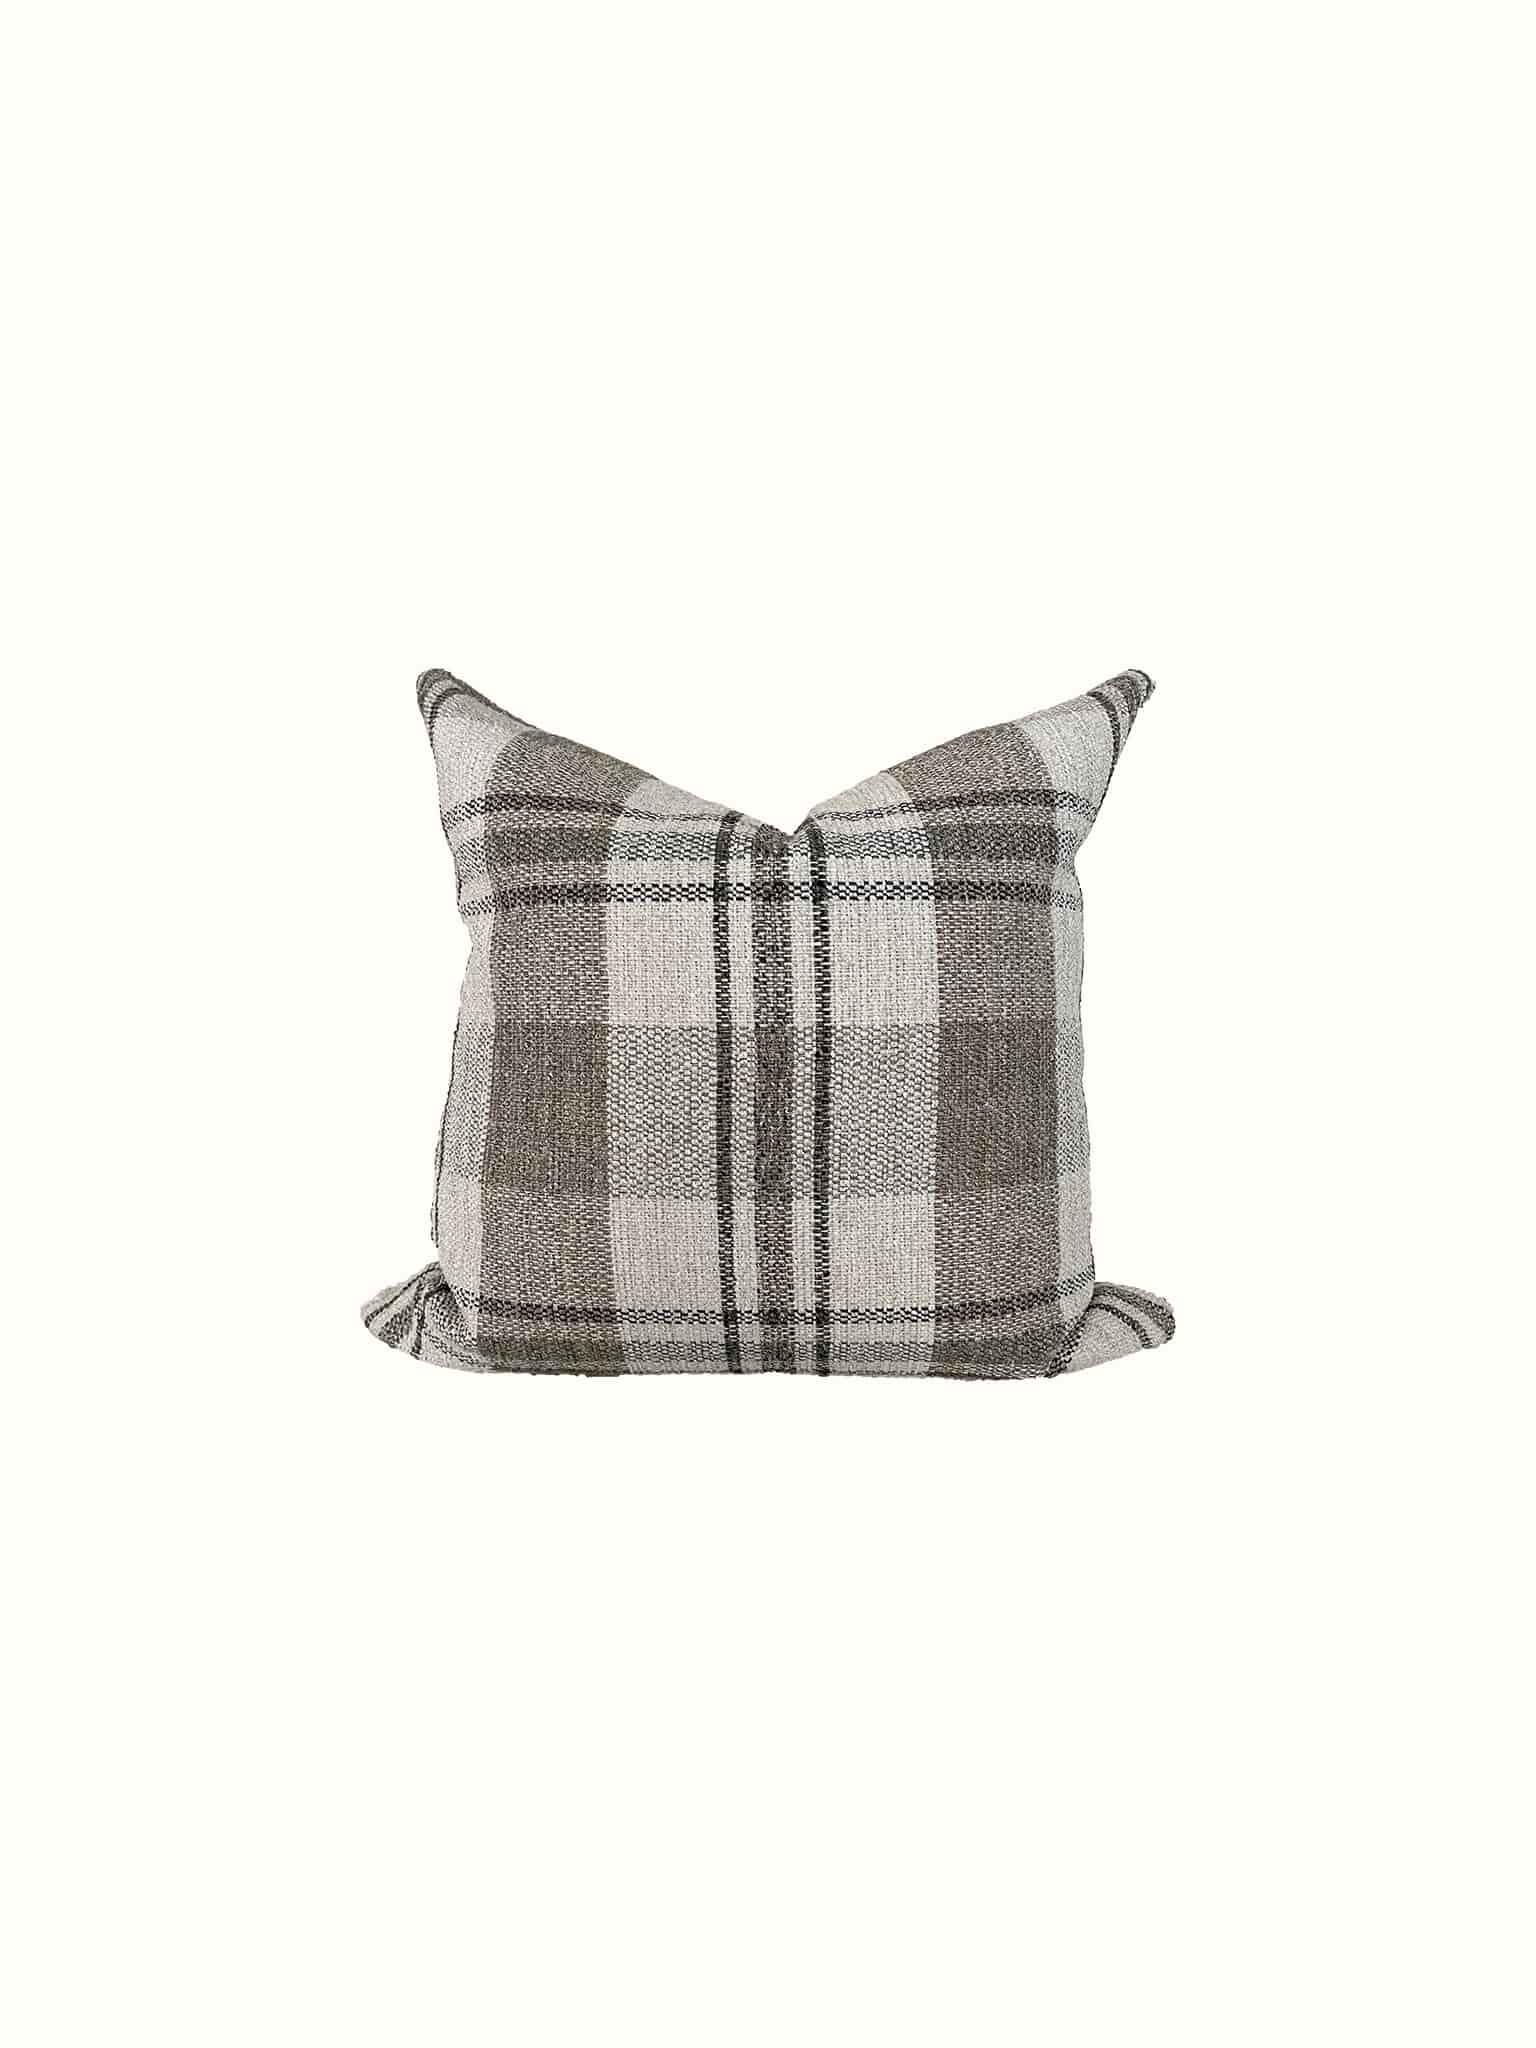 A plaid throw pillow in neutral tones gives a versatile update at Cielle Home 